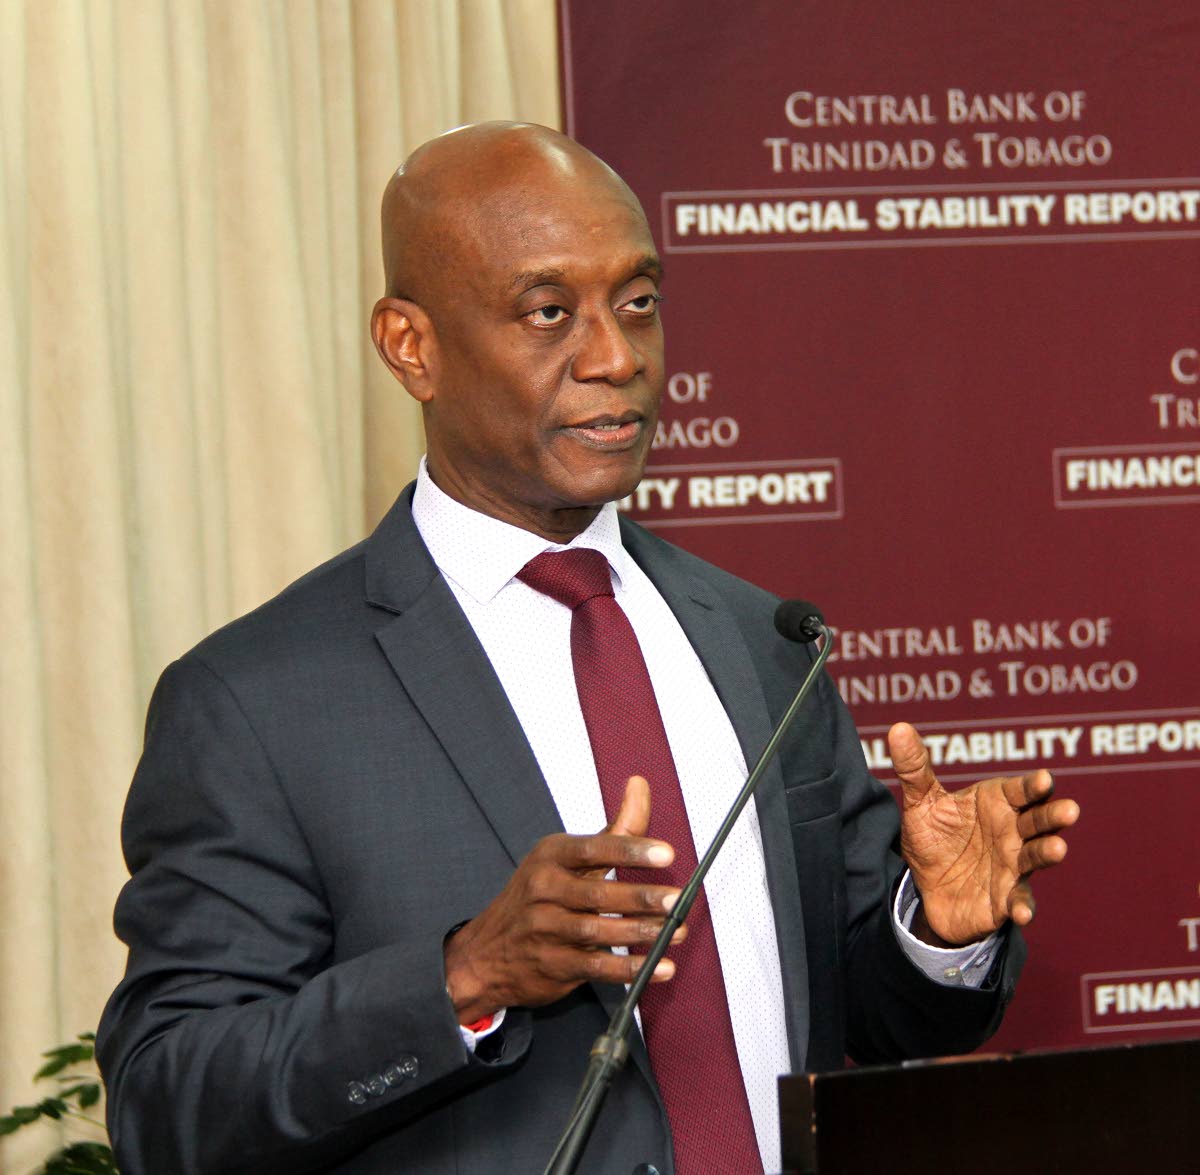 Hilaire to serve 3 more years as Central Bank Governor